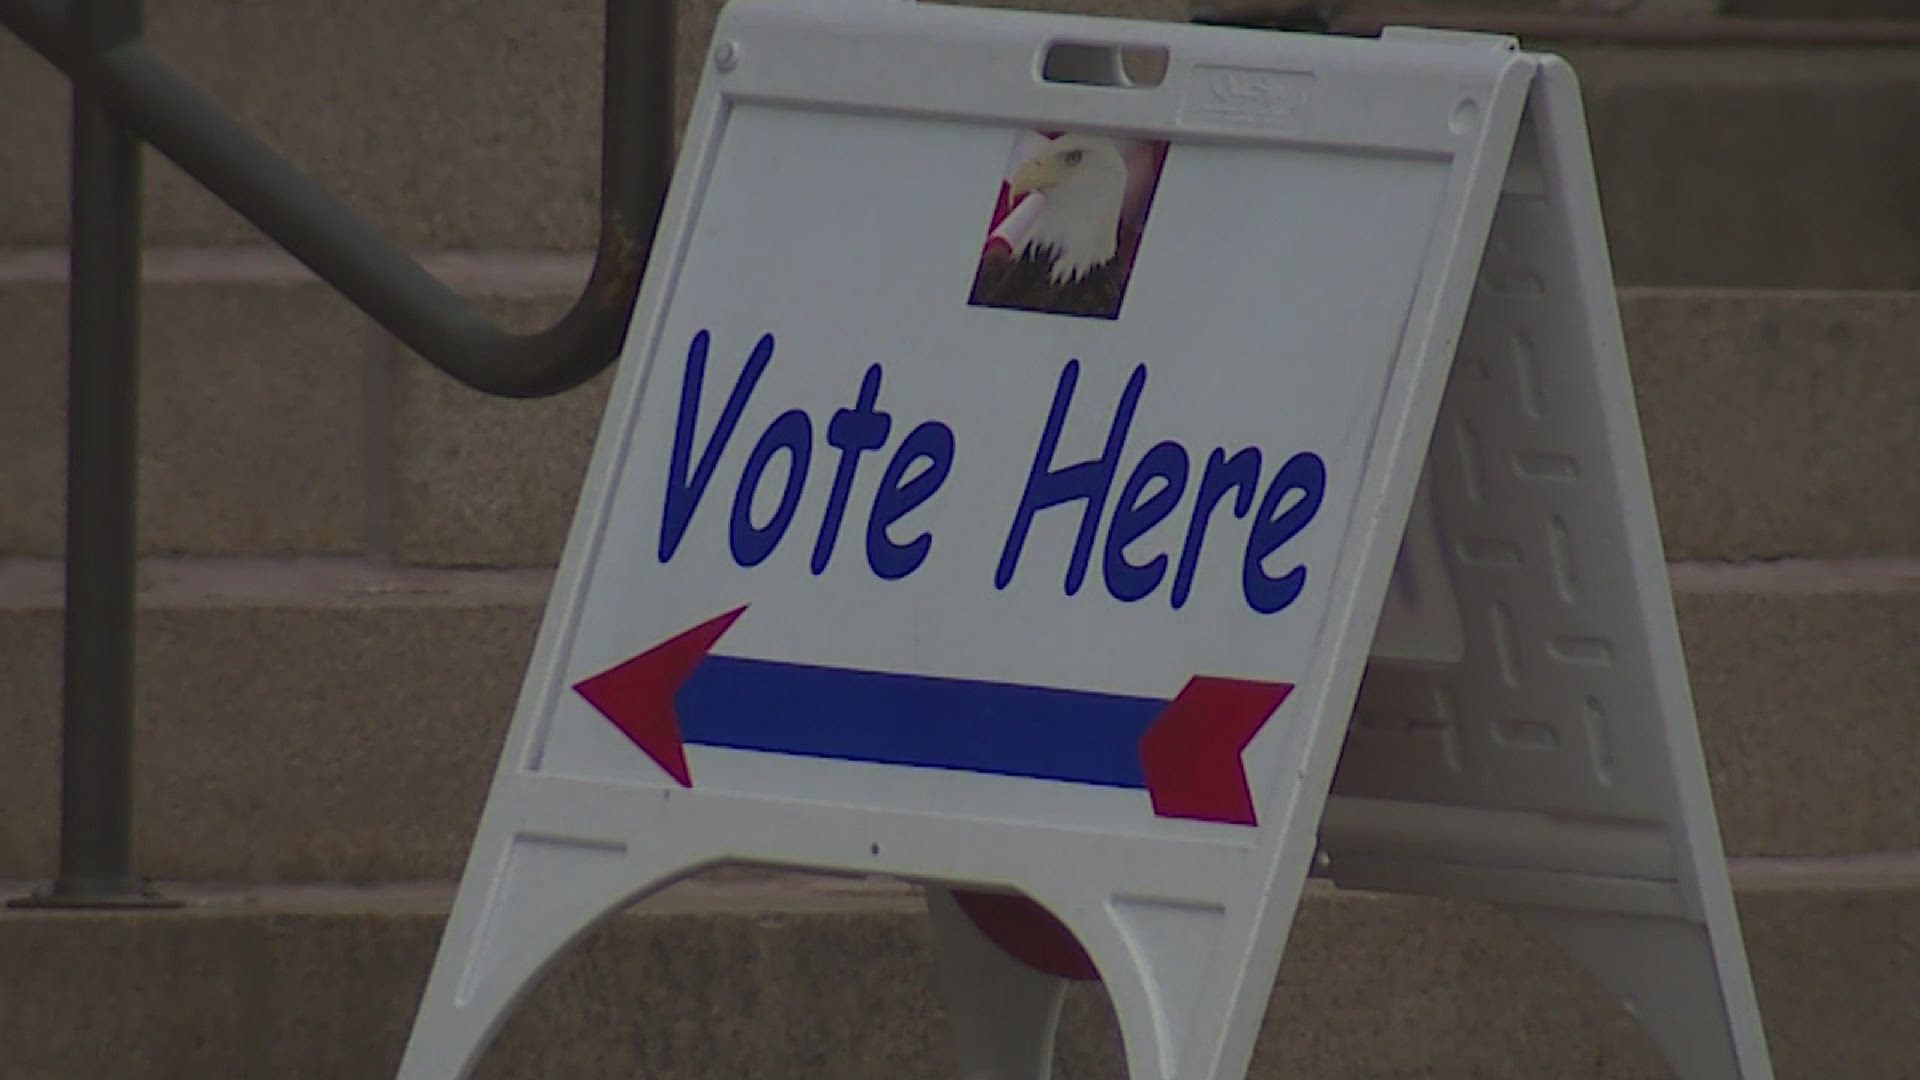 More than 180 measures will be on ballots throughout Rock Island County on April 6. But one week out, only 2% of eligible voters have early voted.